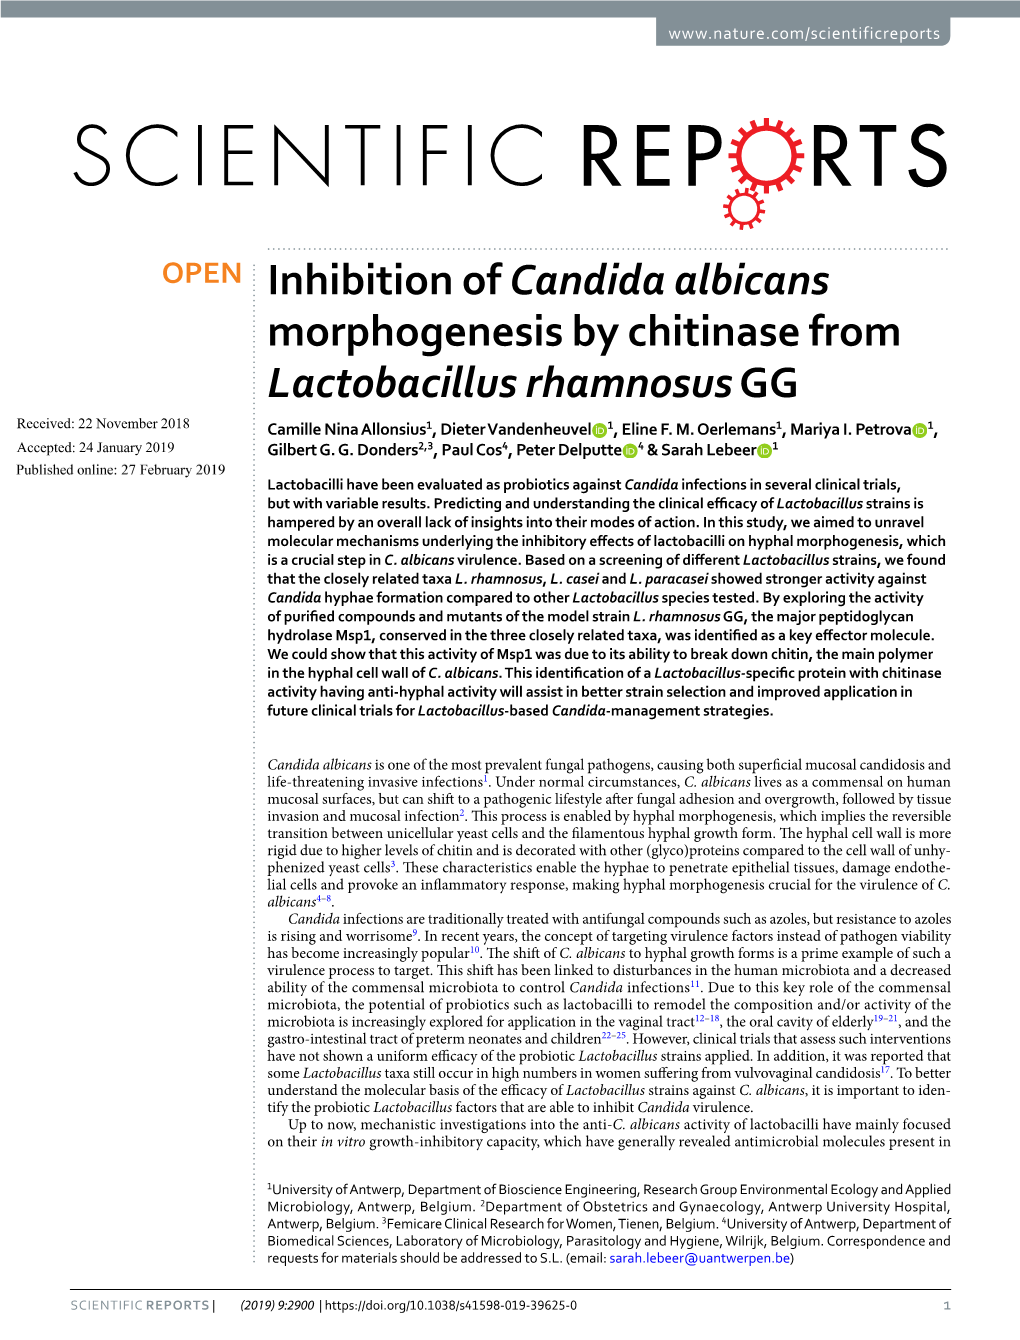 Inhibition of Candida Albicans Morphogenesis by Chitinase From